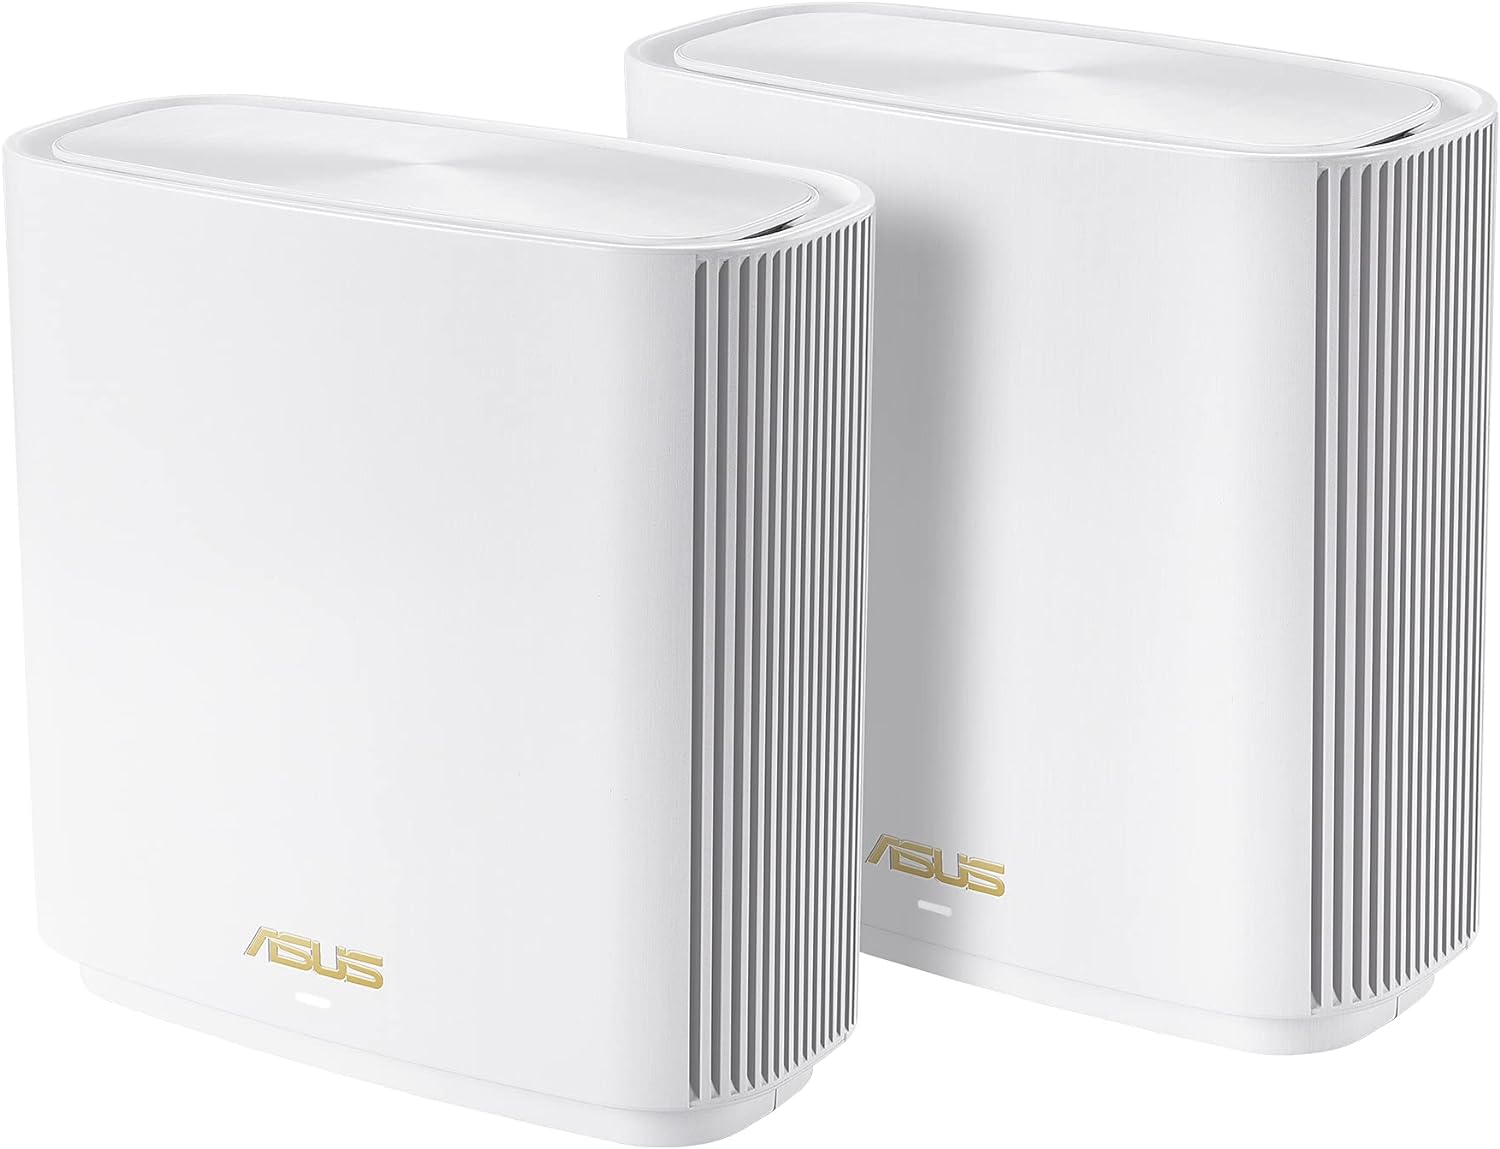 Limited-time deal ASUS ZenWiFi Whole-Home Tri-Band Mesh WiFi 6E System ET8 2PK , Coverage up to 5,500 sq.ft 6 Rooms, 660